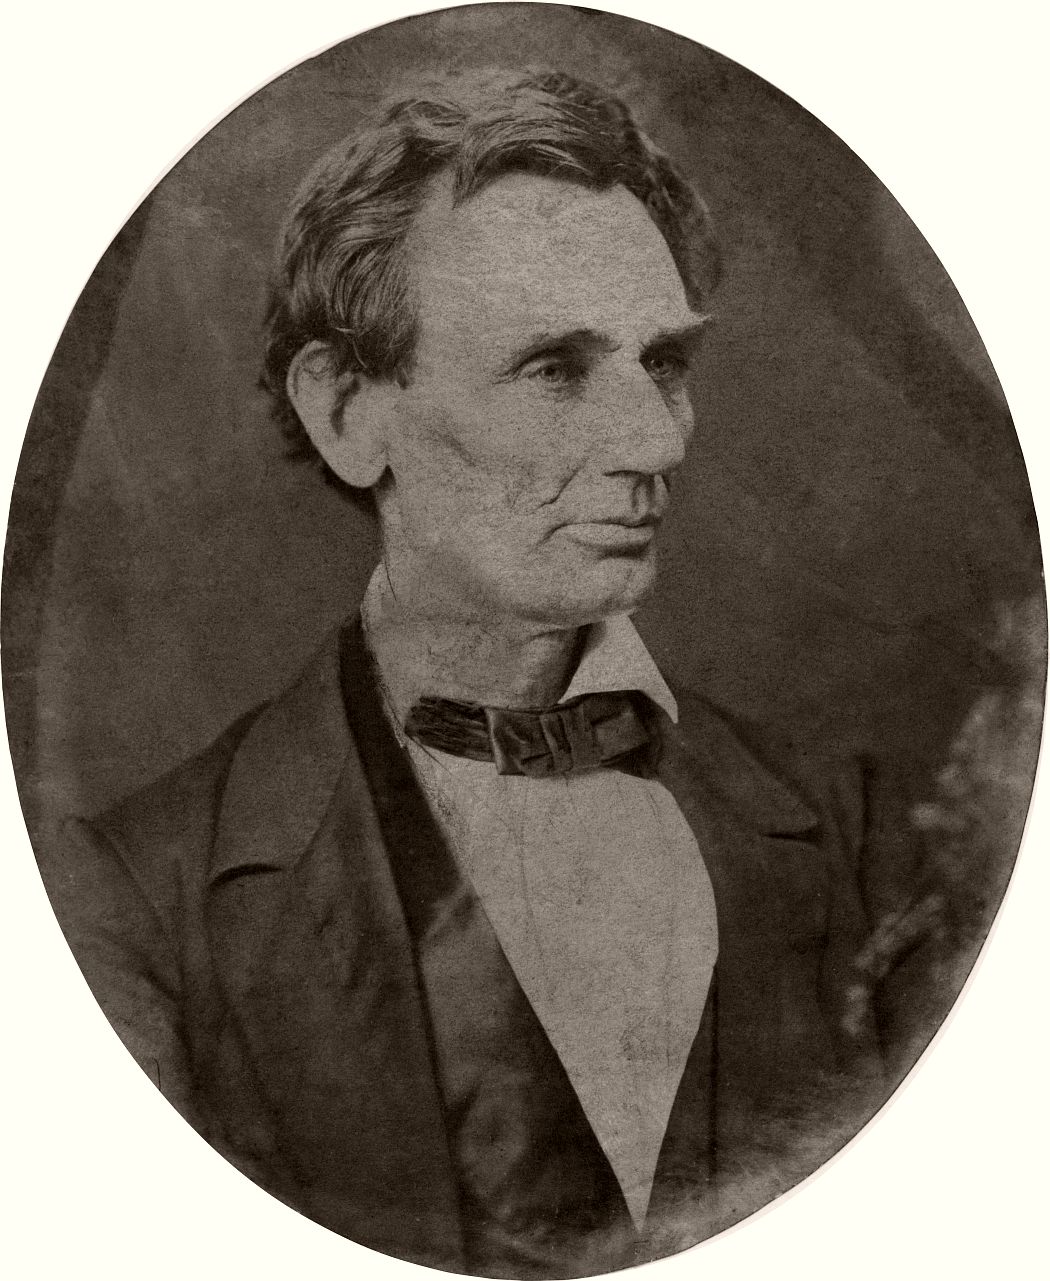 Abraham Lincoln, candidate for U.S. president. Head-and-shoulders portrait, facing right, June 3, 1860